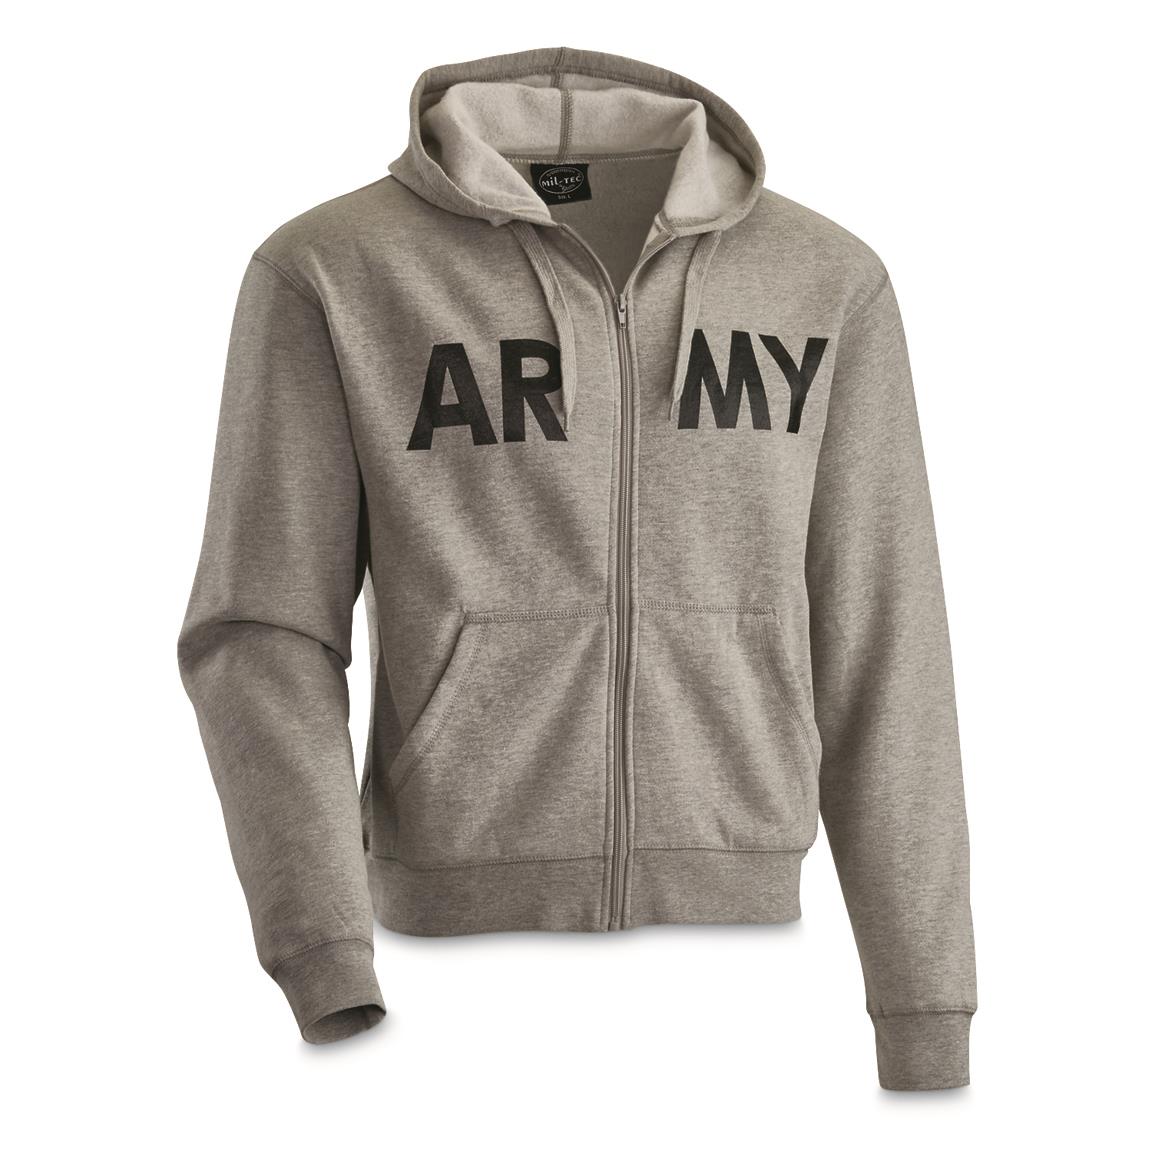 Mil-Tec Military Style Army Hoodie, Gray, New, Gray